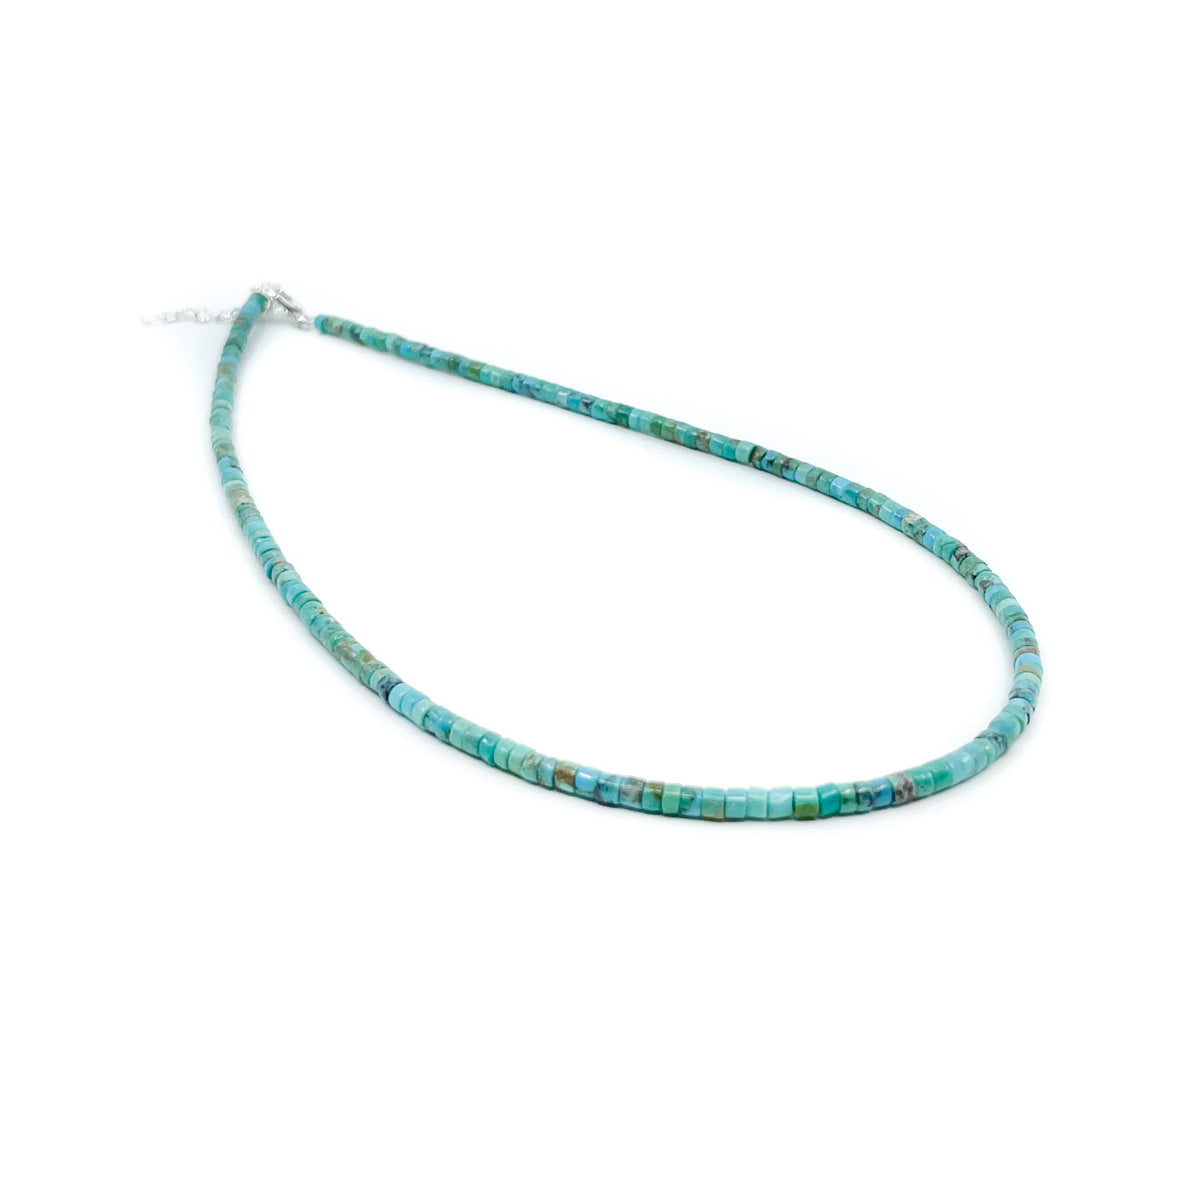 Load image into Gallery viewer, Handmade turquoise heishe bead necklace by Ester Reano, from Kewa Pueblo (Santo Domingo) in New Mexico. Sterling silver lobster claw clasp with high polish finish. Necklace measures 15.5 inches long plus a 2 inch extender is attached to provide a maximum length of 17.5 inches.
